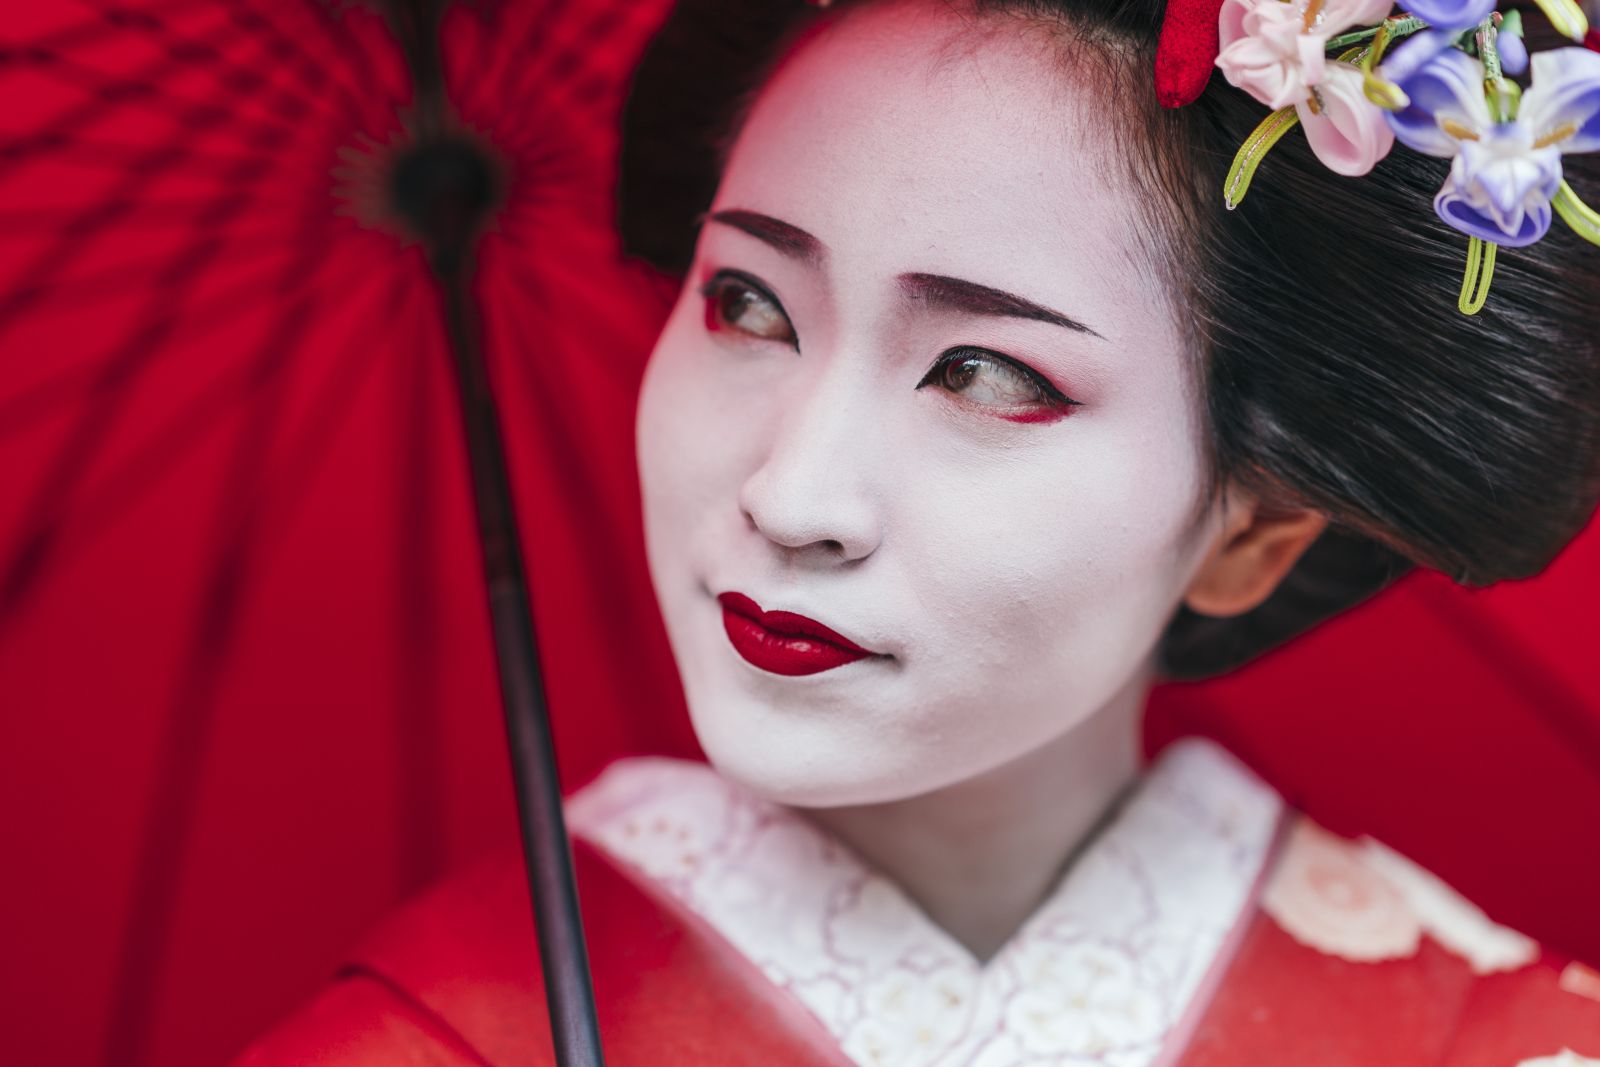 The face of a beautiful geisha in Japan